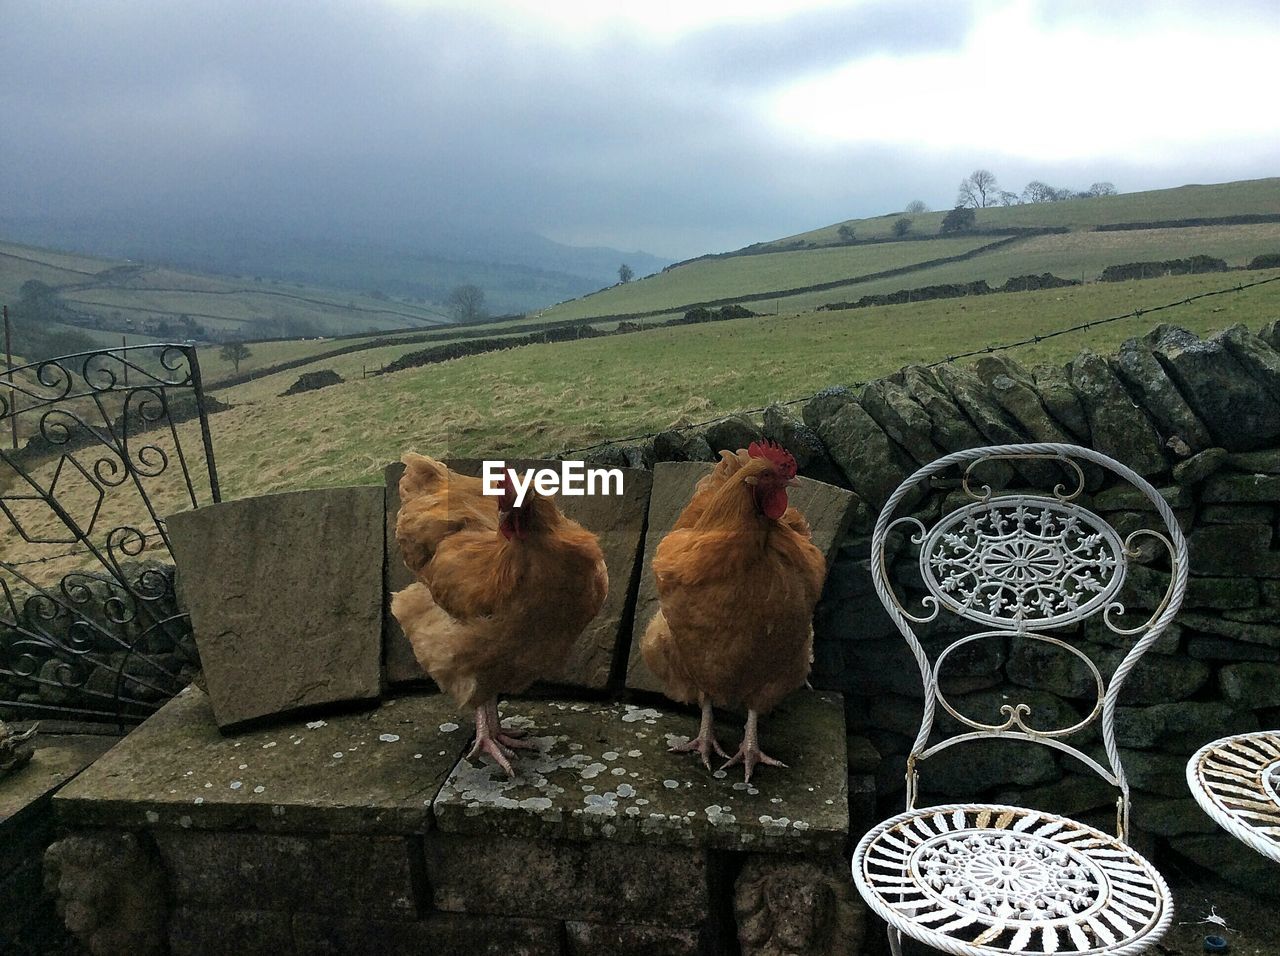 Chickens on table against hill and cloudy sky